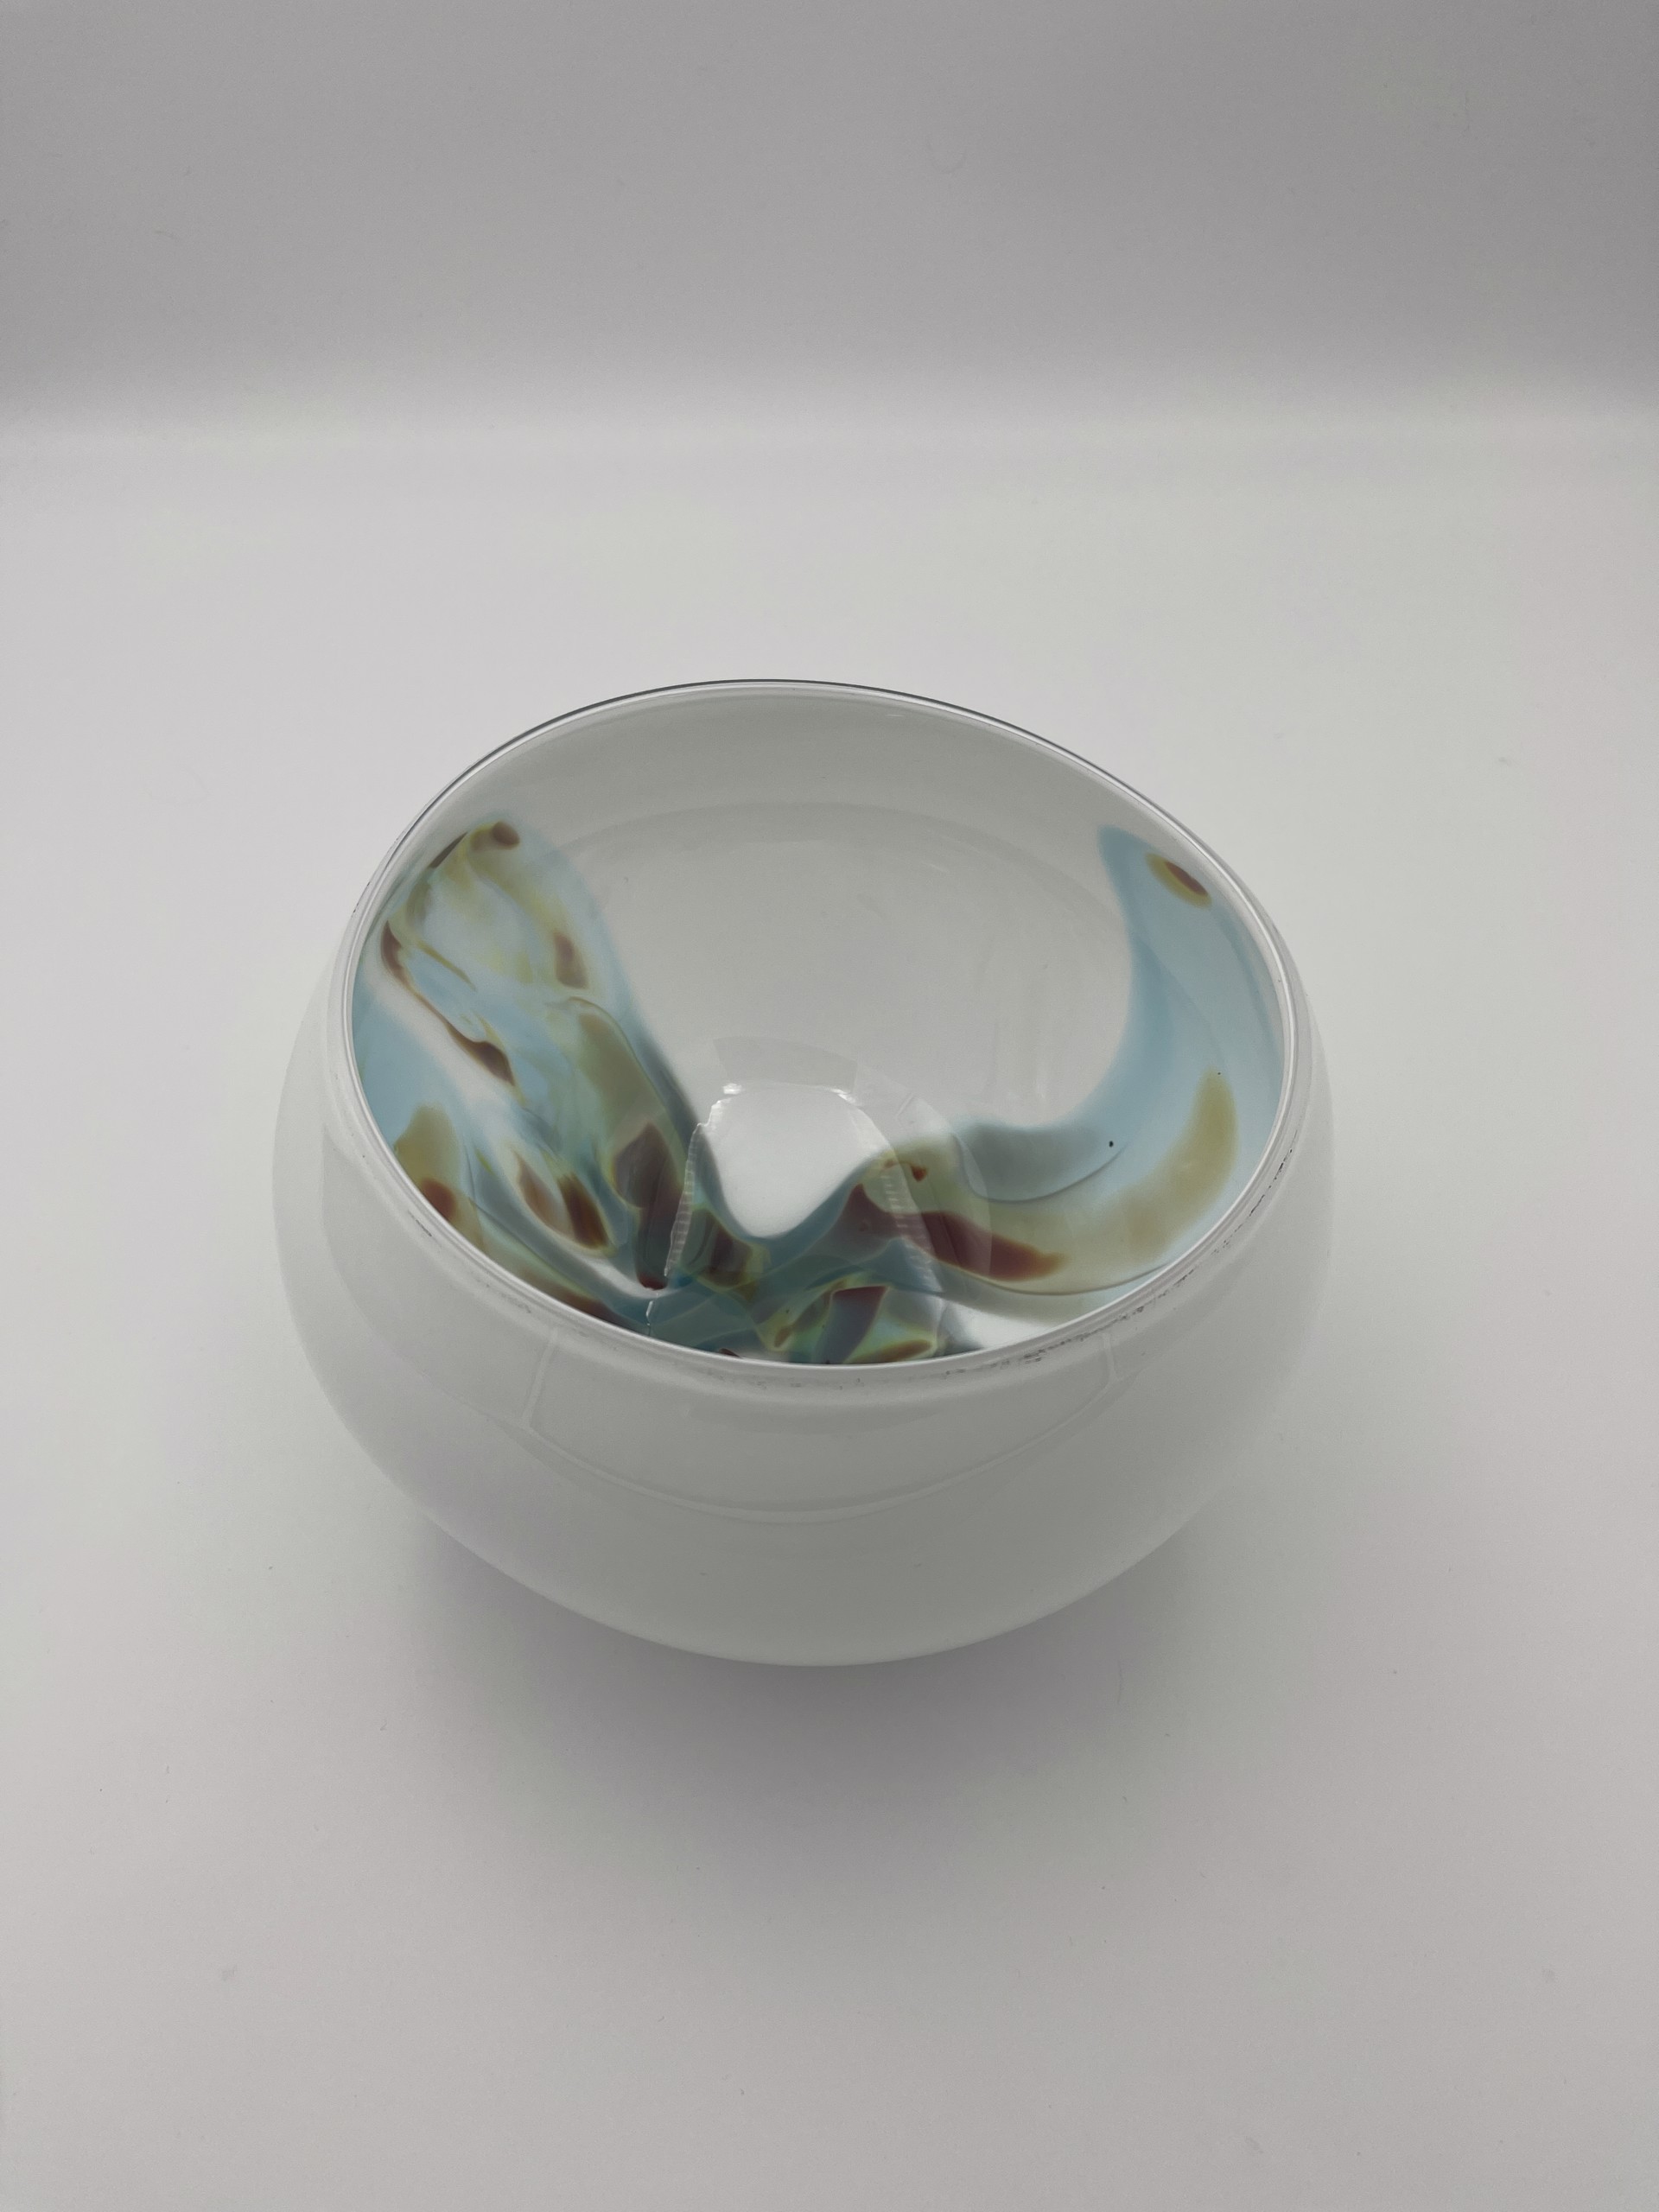 Over Reacted Series: Bowl by Katherine Russell